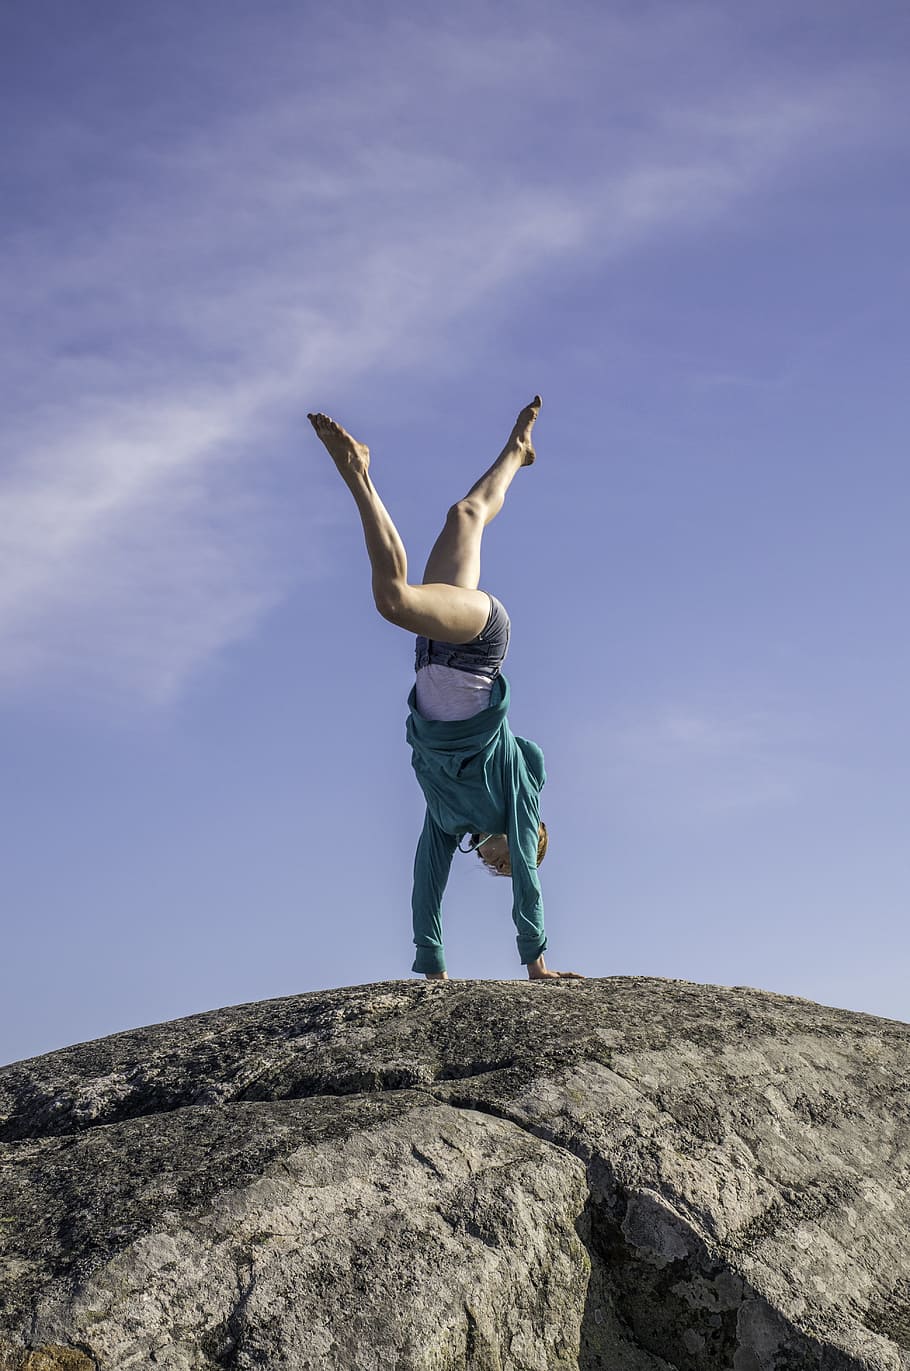 handstand, young woman, windy, brave, bold, gymnast, mountain, mount monadnock, sky, solid